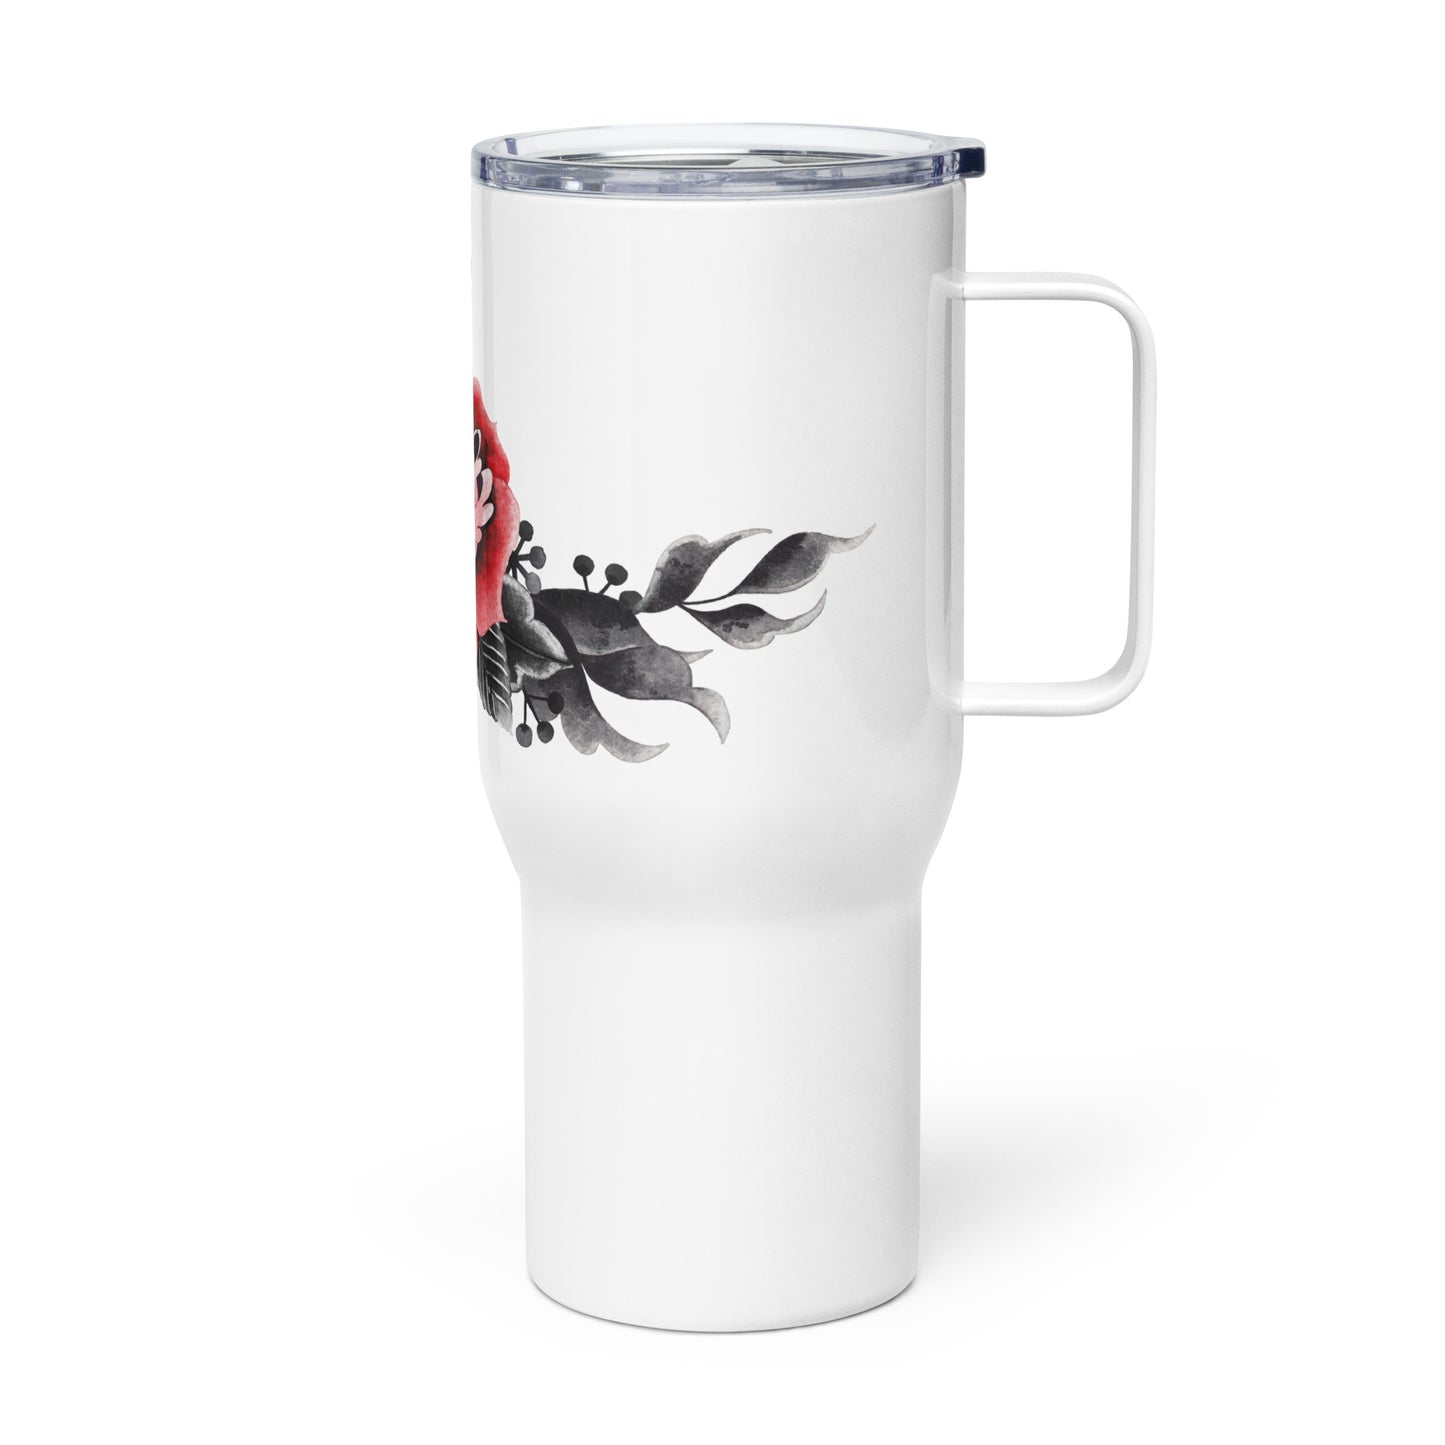 Travel mug with a handle Red & Black Flower